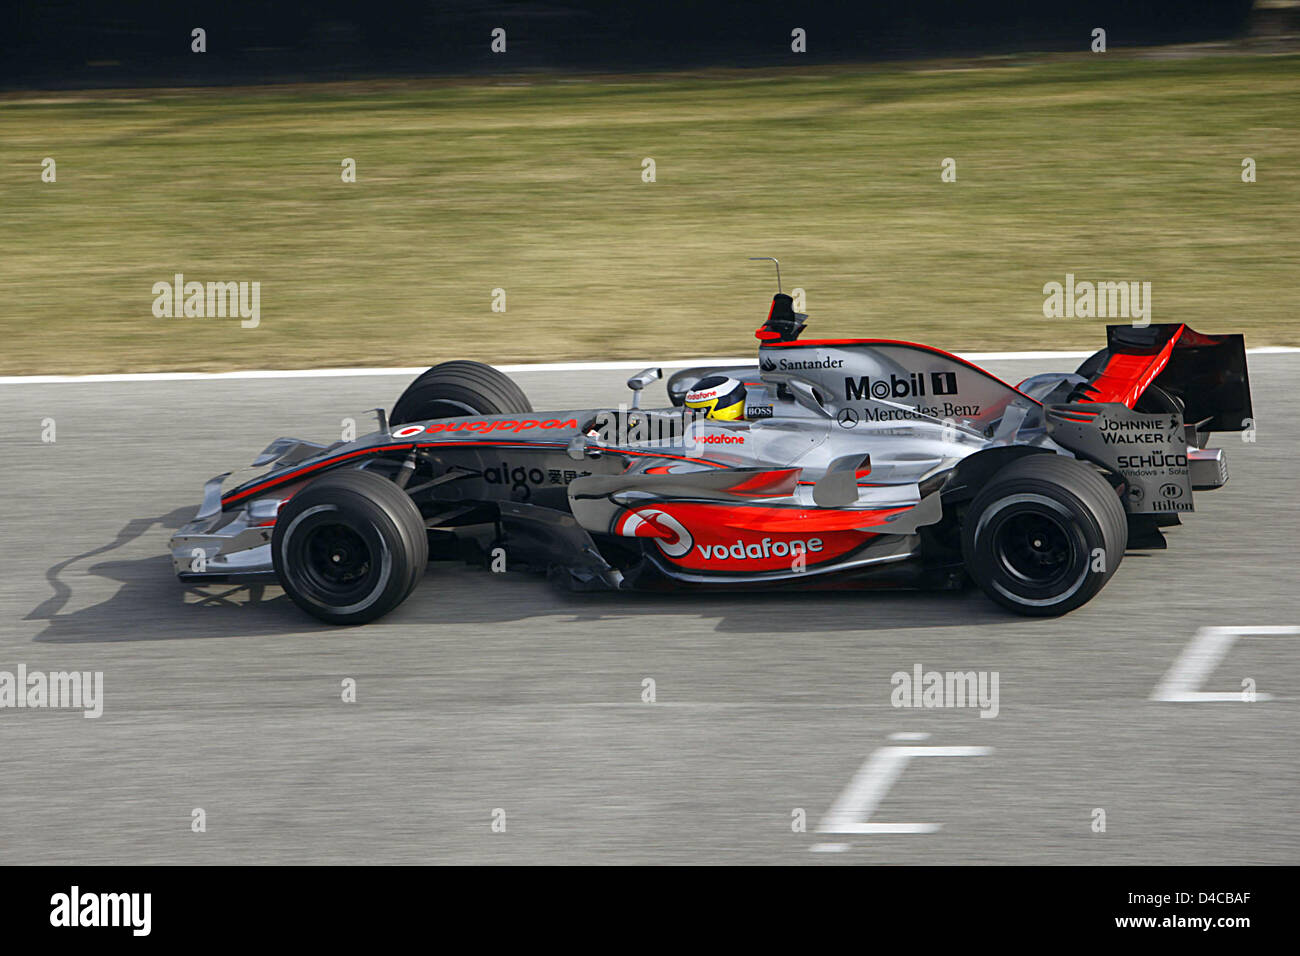 Spanish test driver Pedro de la Rosa steers the new Vodafone McLaren Mercedes MP4-23 racing car during the first test run at the Cicuito de Jerez racetrack in Jerez, Spain, 09 January 2008. The car was presented to the public in Stuttgart on 07 January. Photo: DAIMLER BENZ Stock Photo